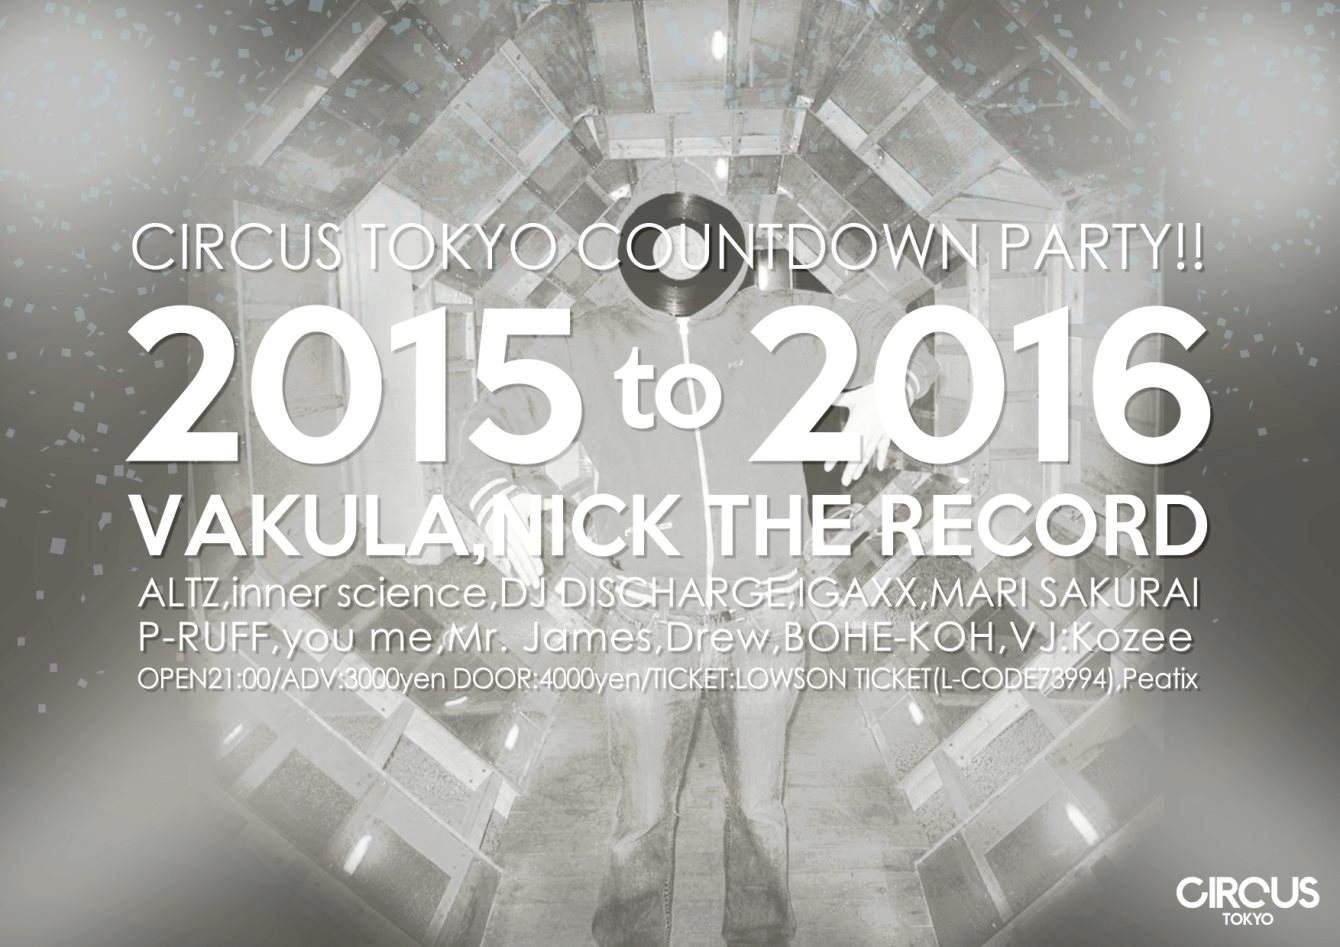 Countdown 2015 to 2016 - フライヤー裏